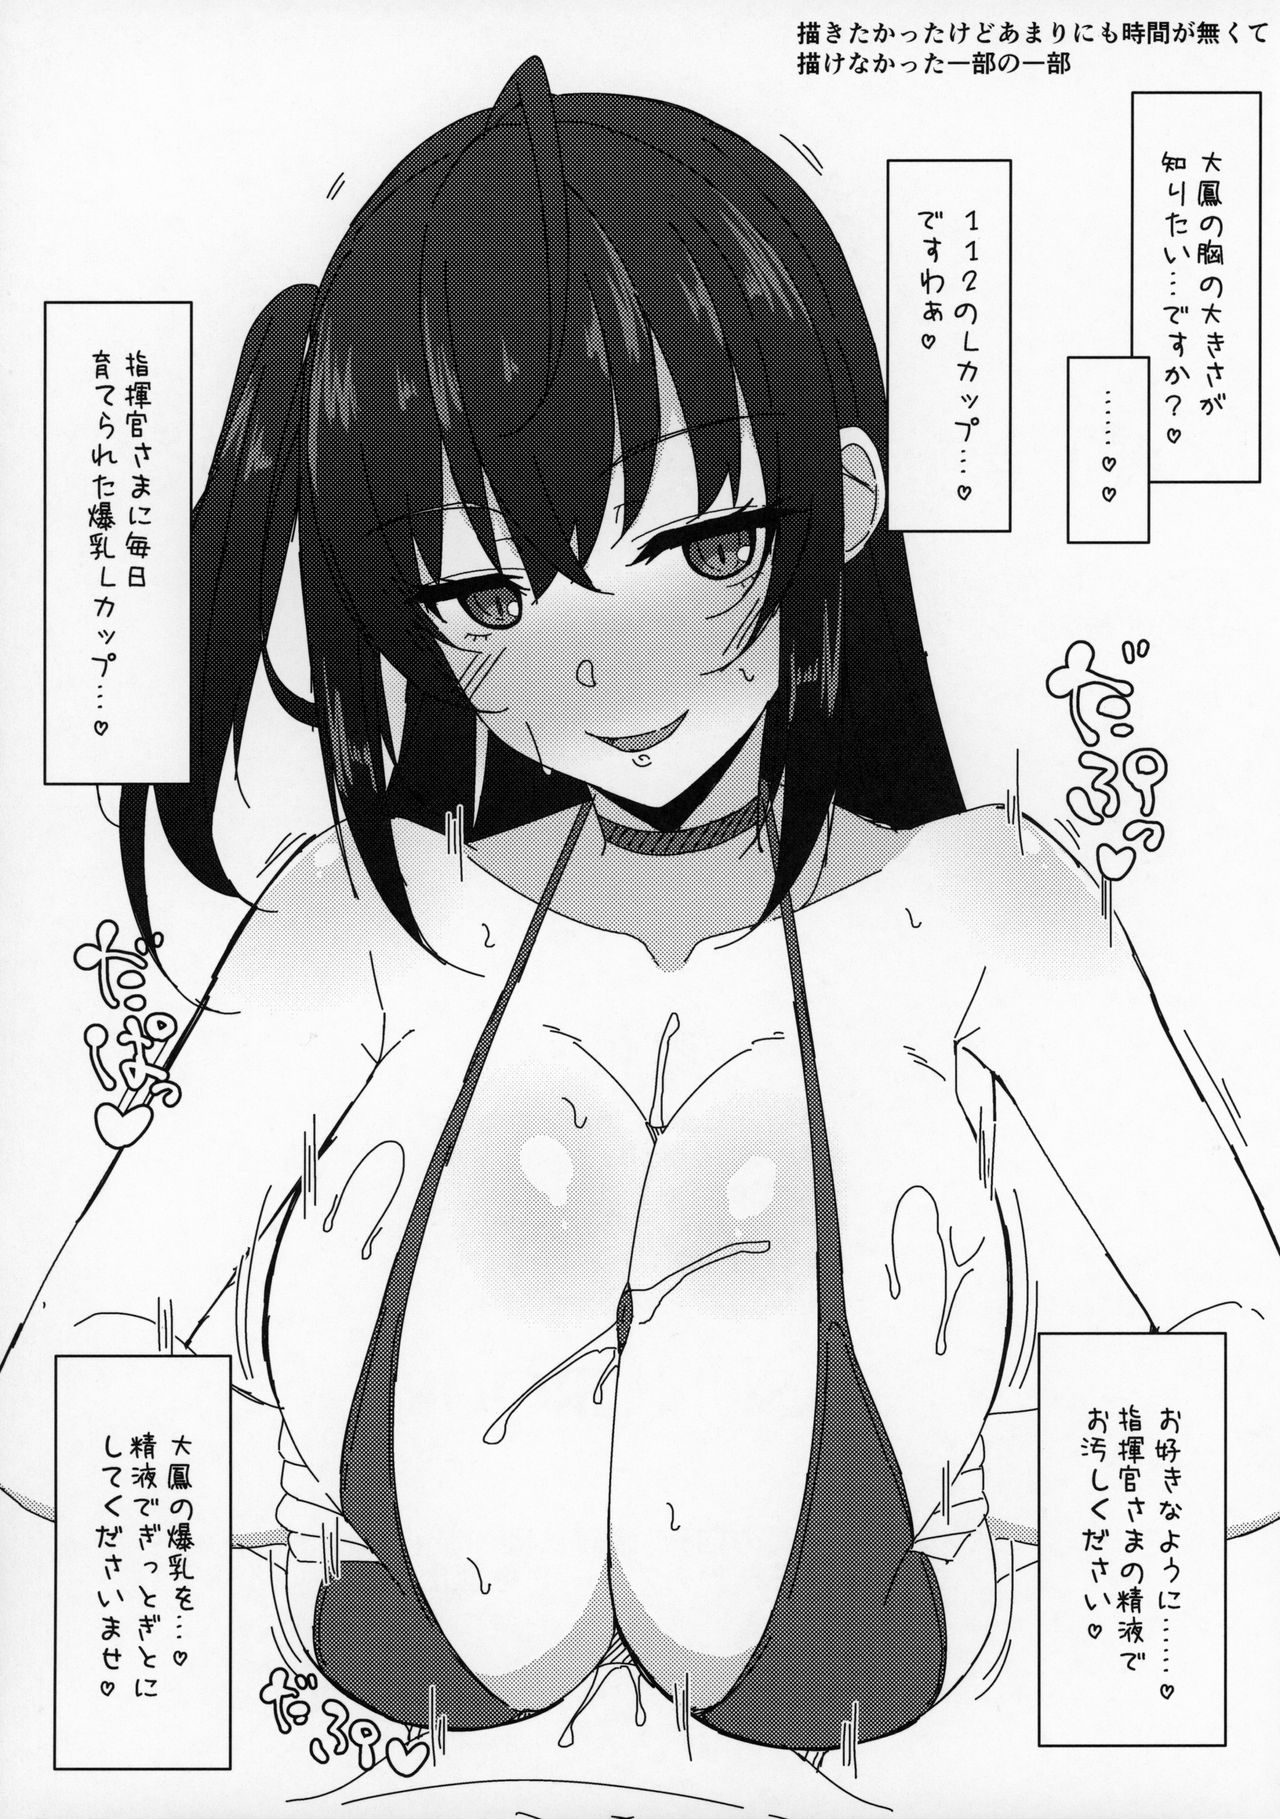 (COMIC1☆15) [Cow Lipid (Fuurai)] LUCKY DISCHARGE (Azur Lane) page 12 full